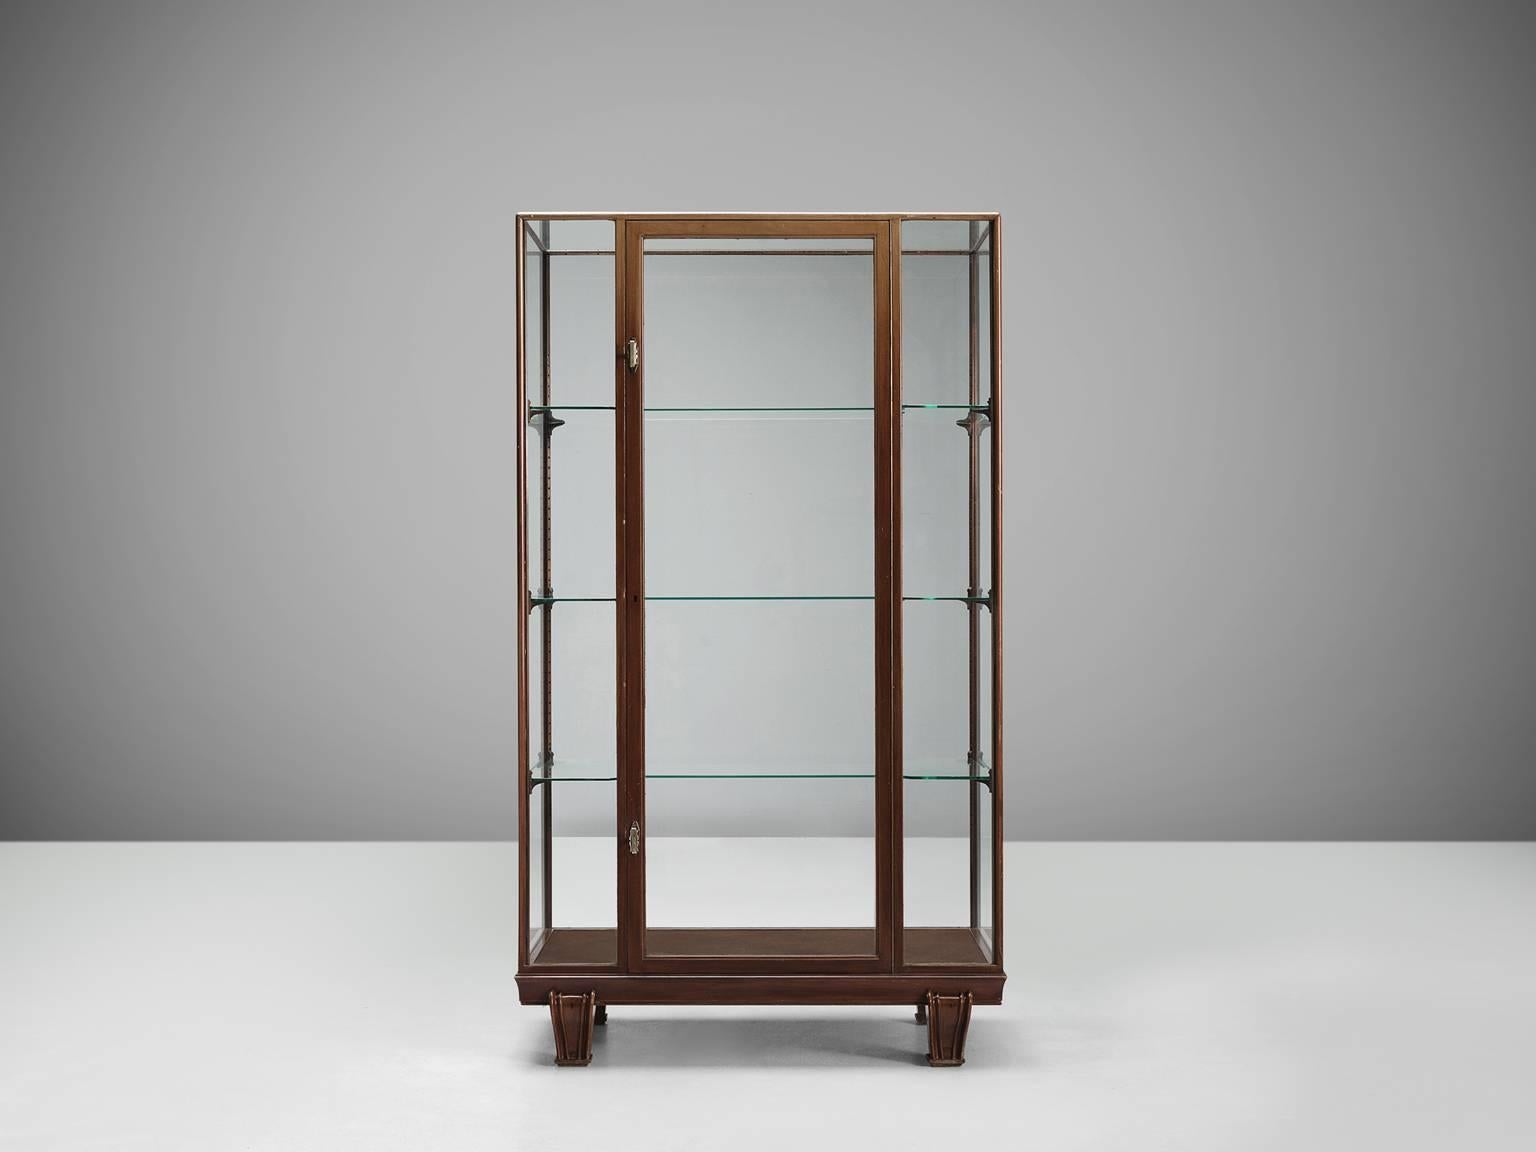 Vitrine, wood, glass, steel, Europe, 1960s.

Sturdy and Minimalist showcase in glass and wood. The base of this vitrine is beautifully simply designed as it features a wooden foot that is built up of four sturdy feet. The middle panel features a